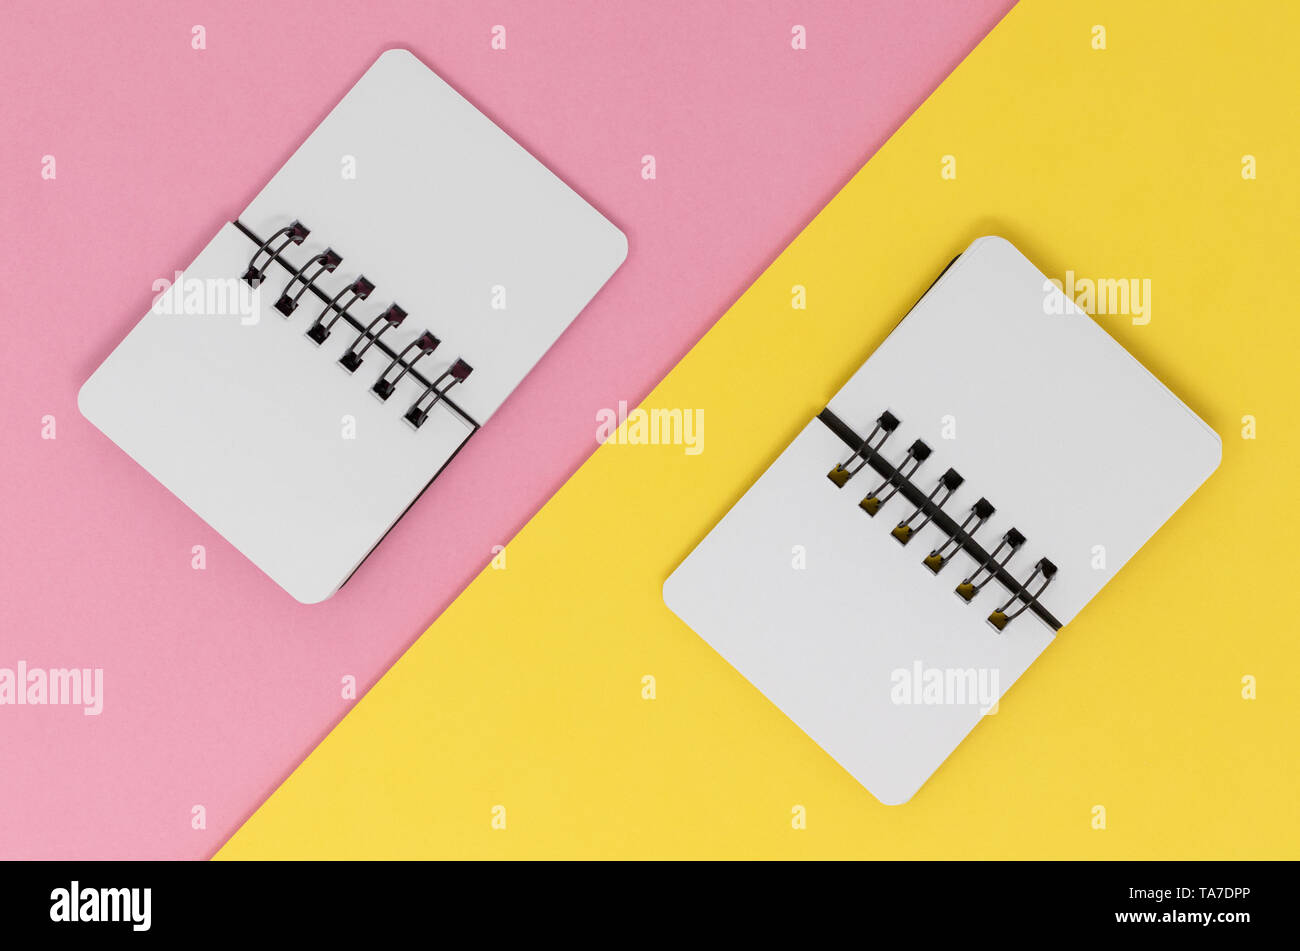 Two open notebooks on a pink and yellow diagonal background.Flat lay with copy space. Stock Photo